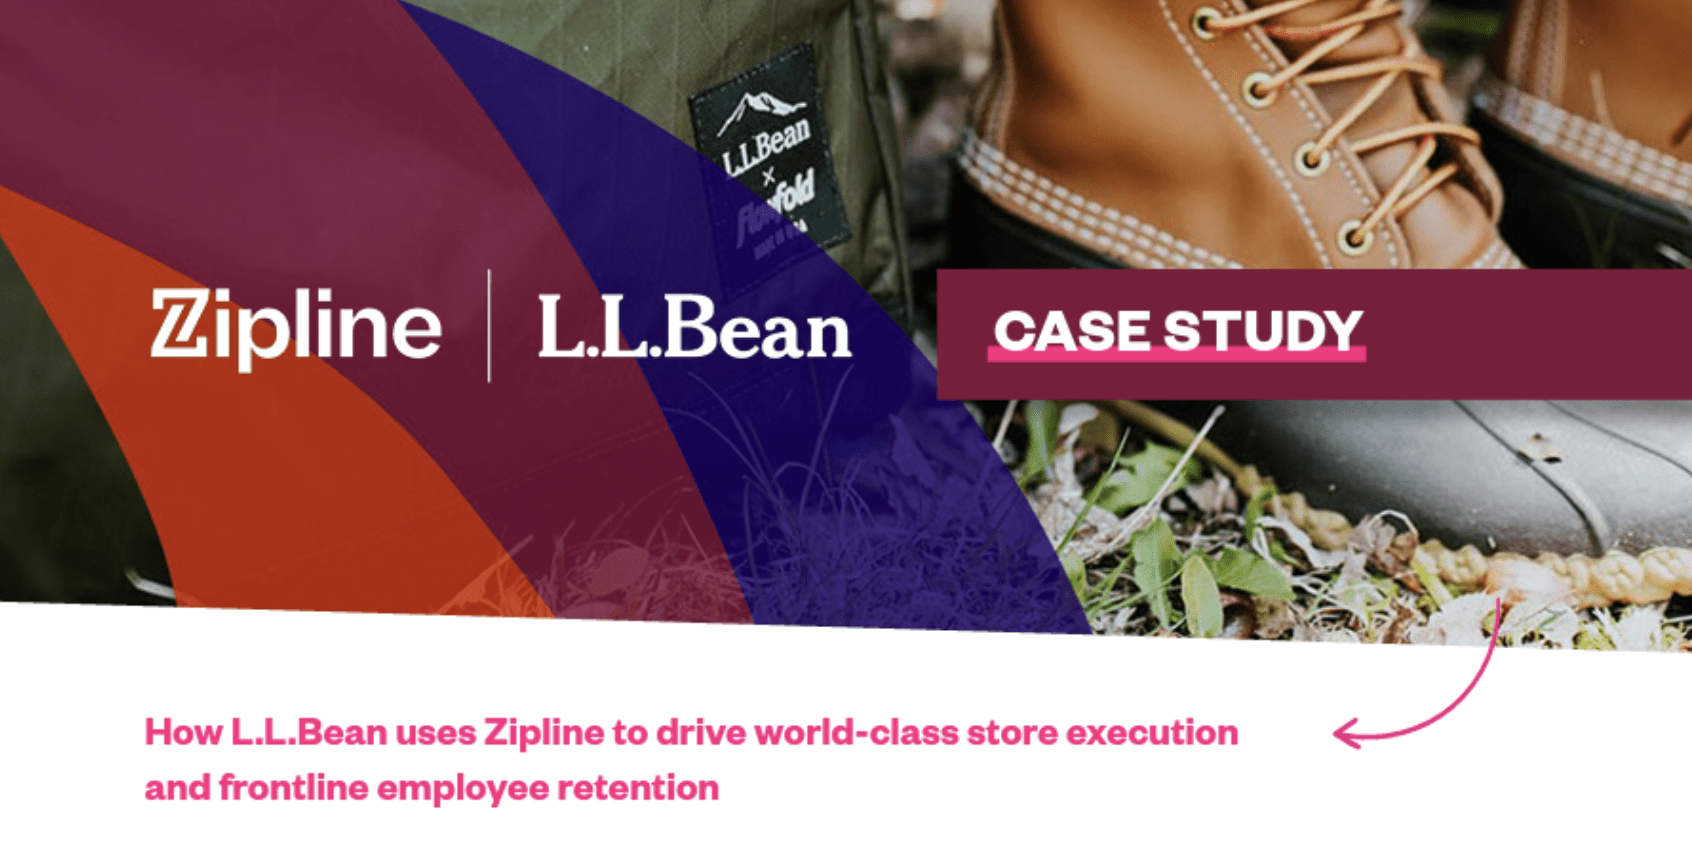 how llbean - How L.L.Bean uses Zipline to drive world-class store execution and frontline employee retention